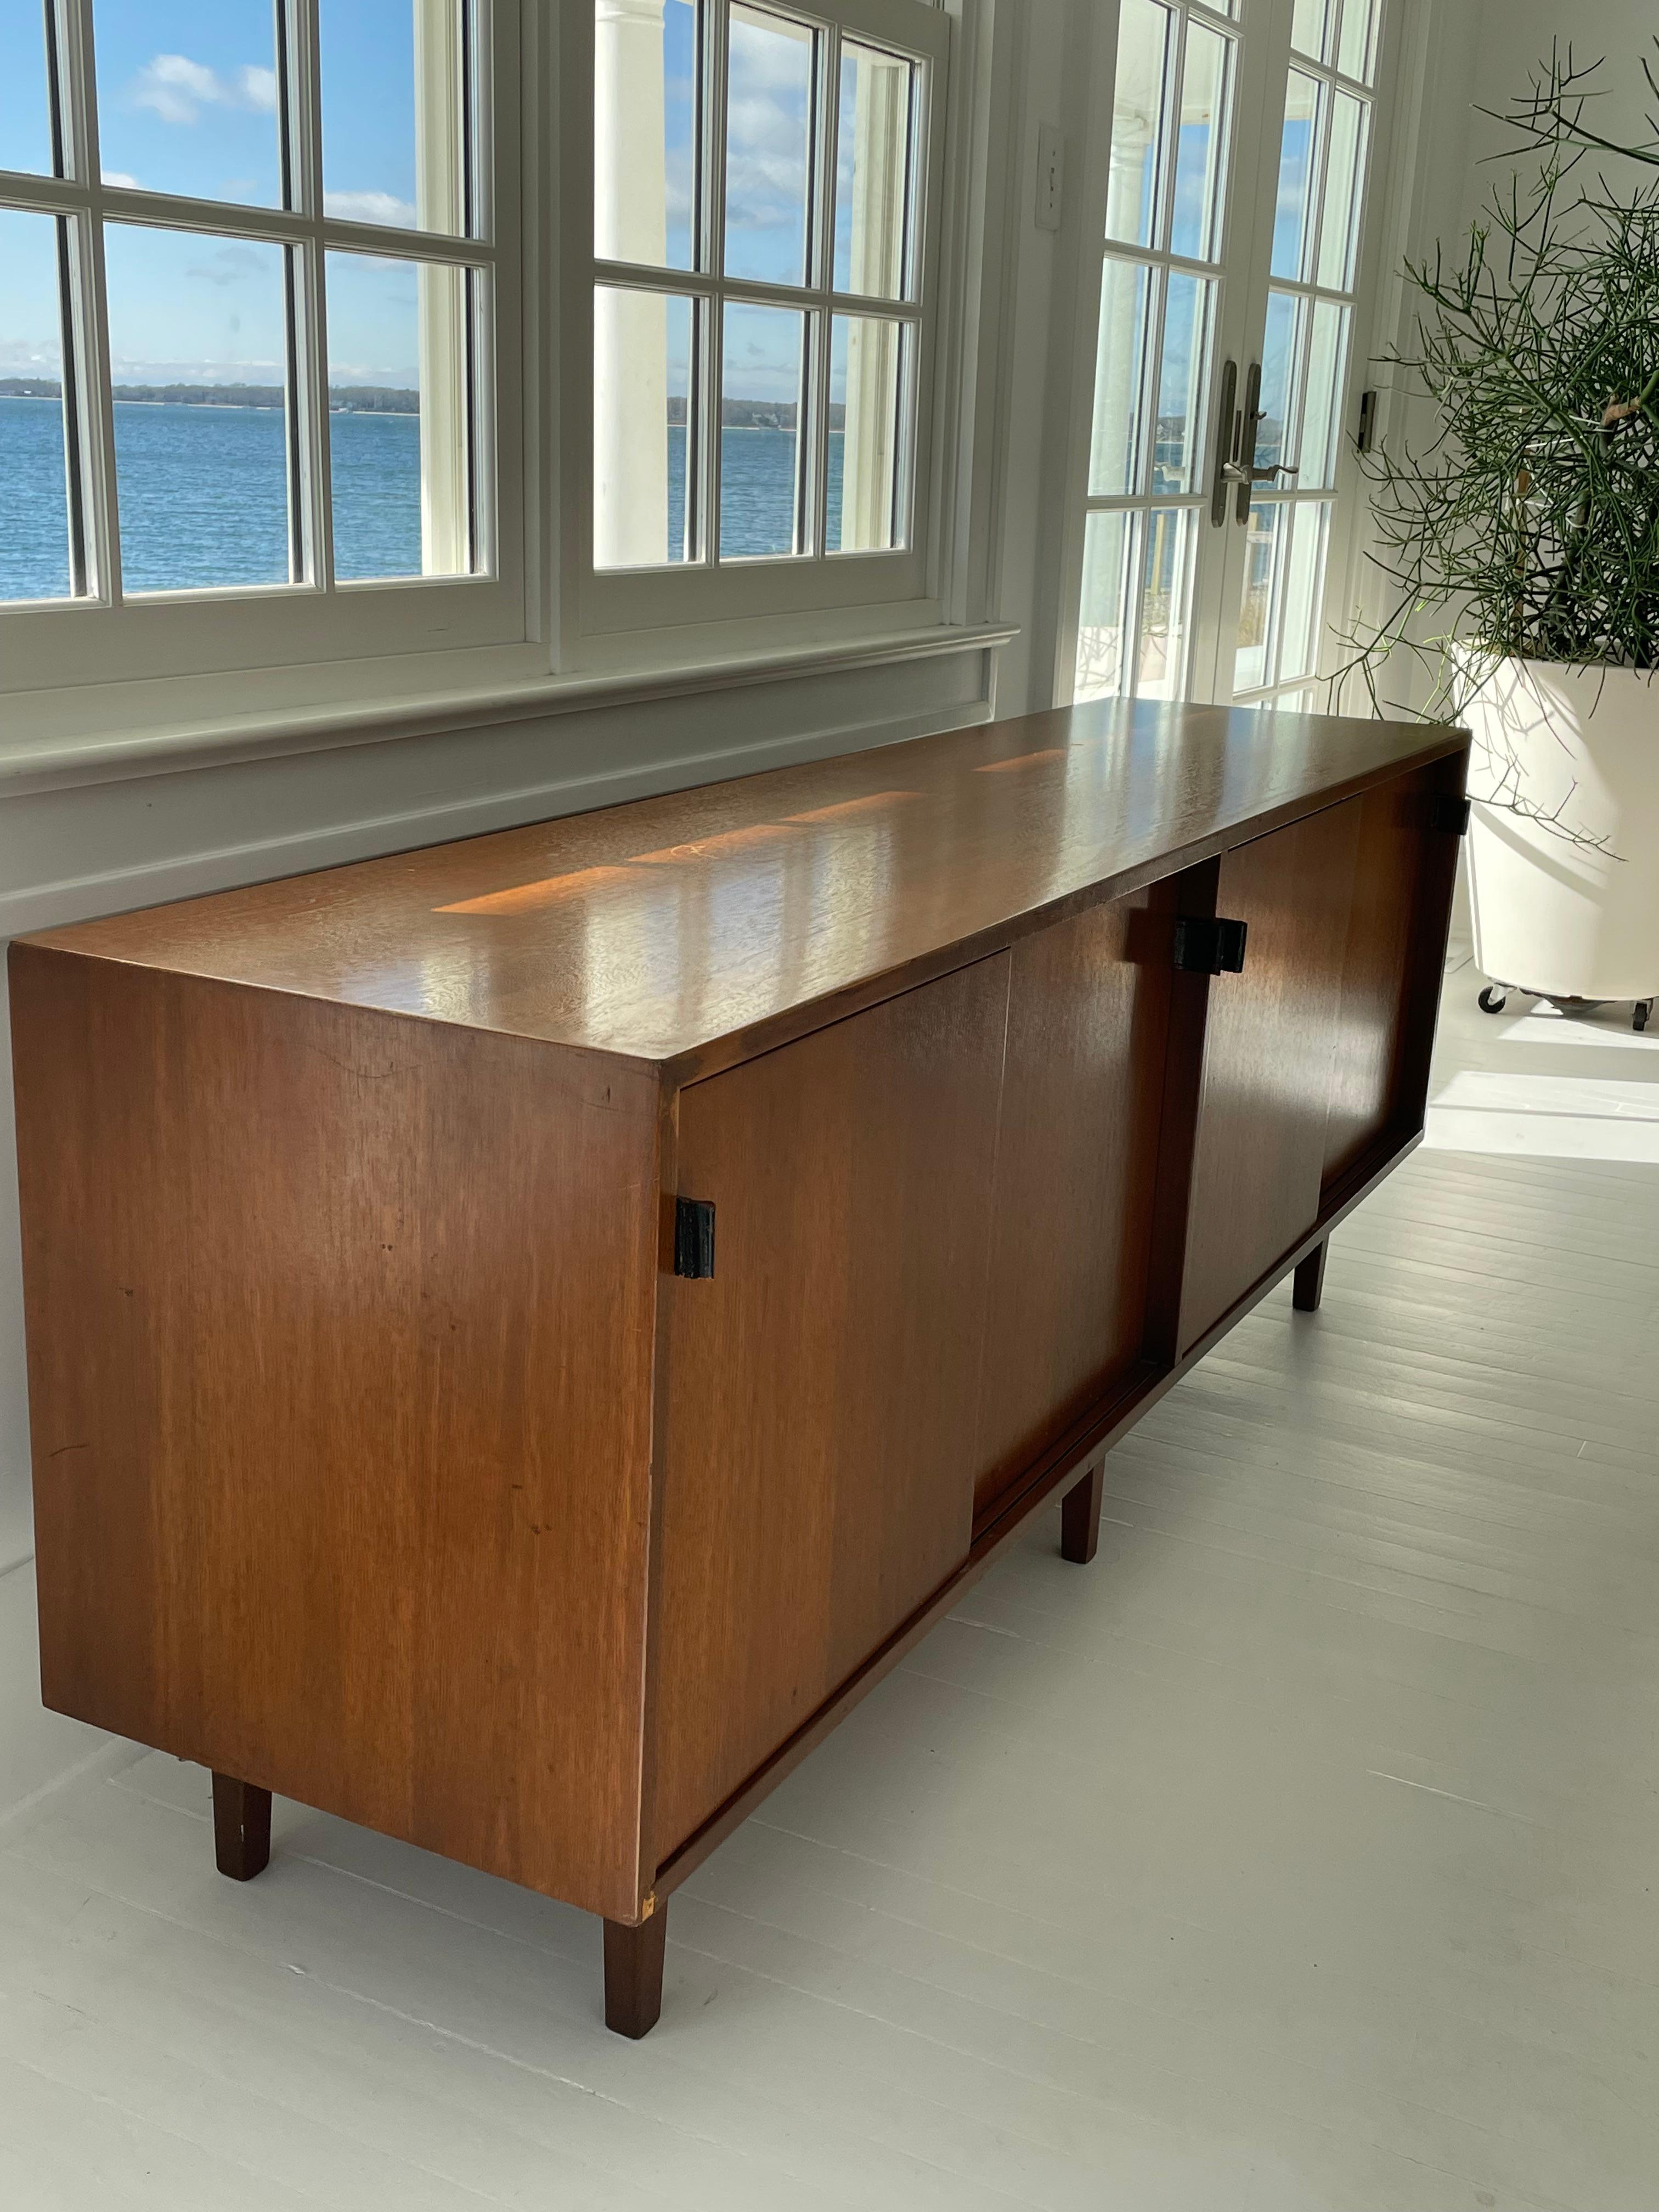 This elegant and classic Mid Century understated Knoll credenza has four sliding doors with original leather pulls and adjustable wood shelves. This seems to be an early piece with rare wood square legs . A real beauty! Very good condition.